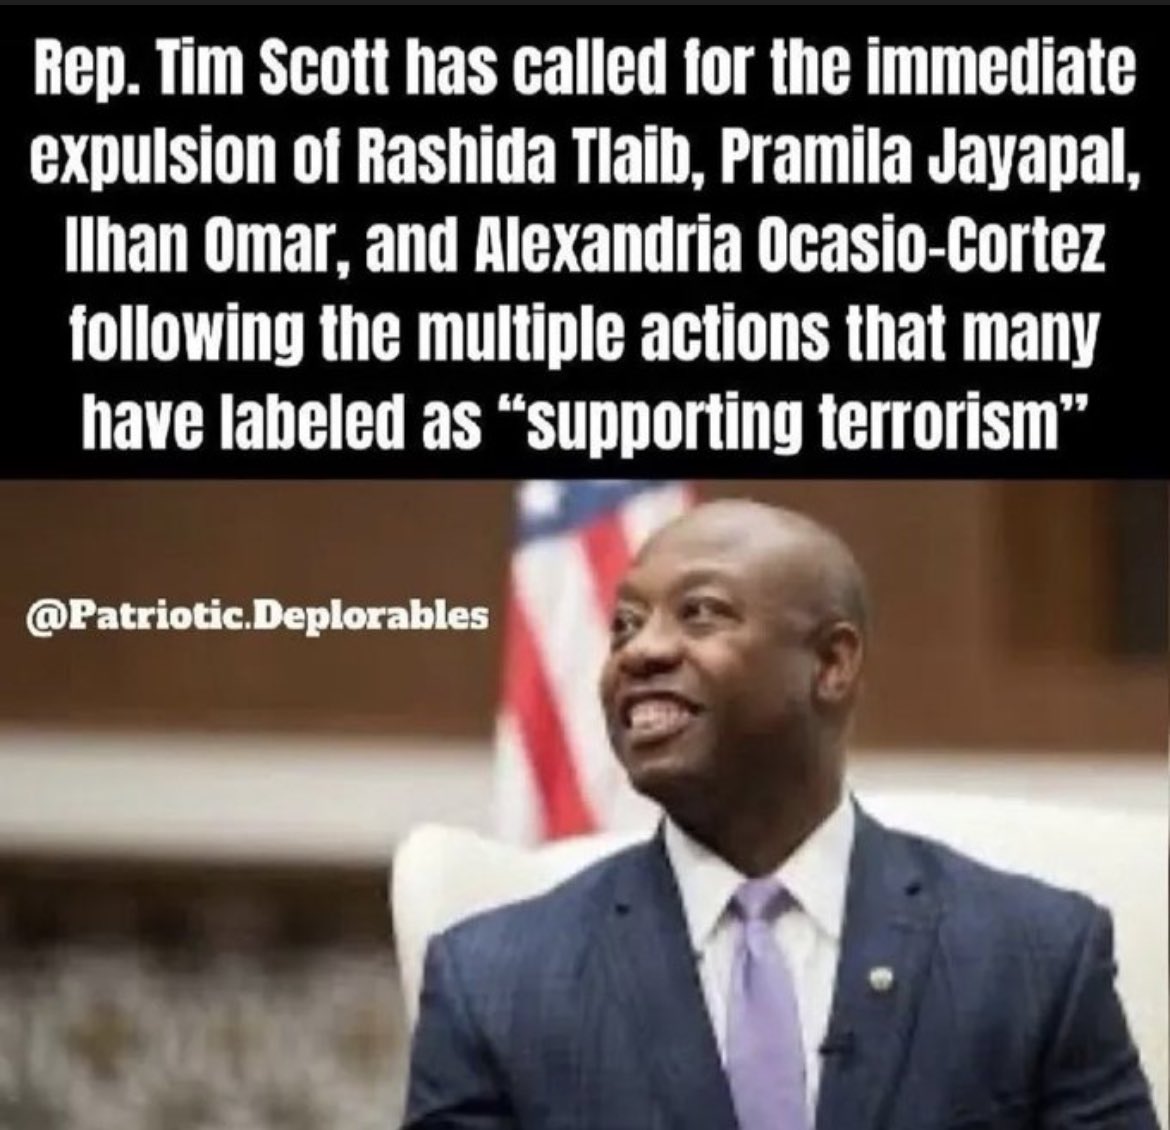 I stand with Rep Tim Scott 🇺🇸Expel and Deport the Squad!